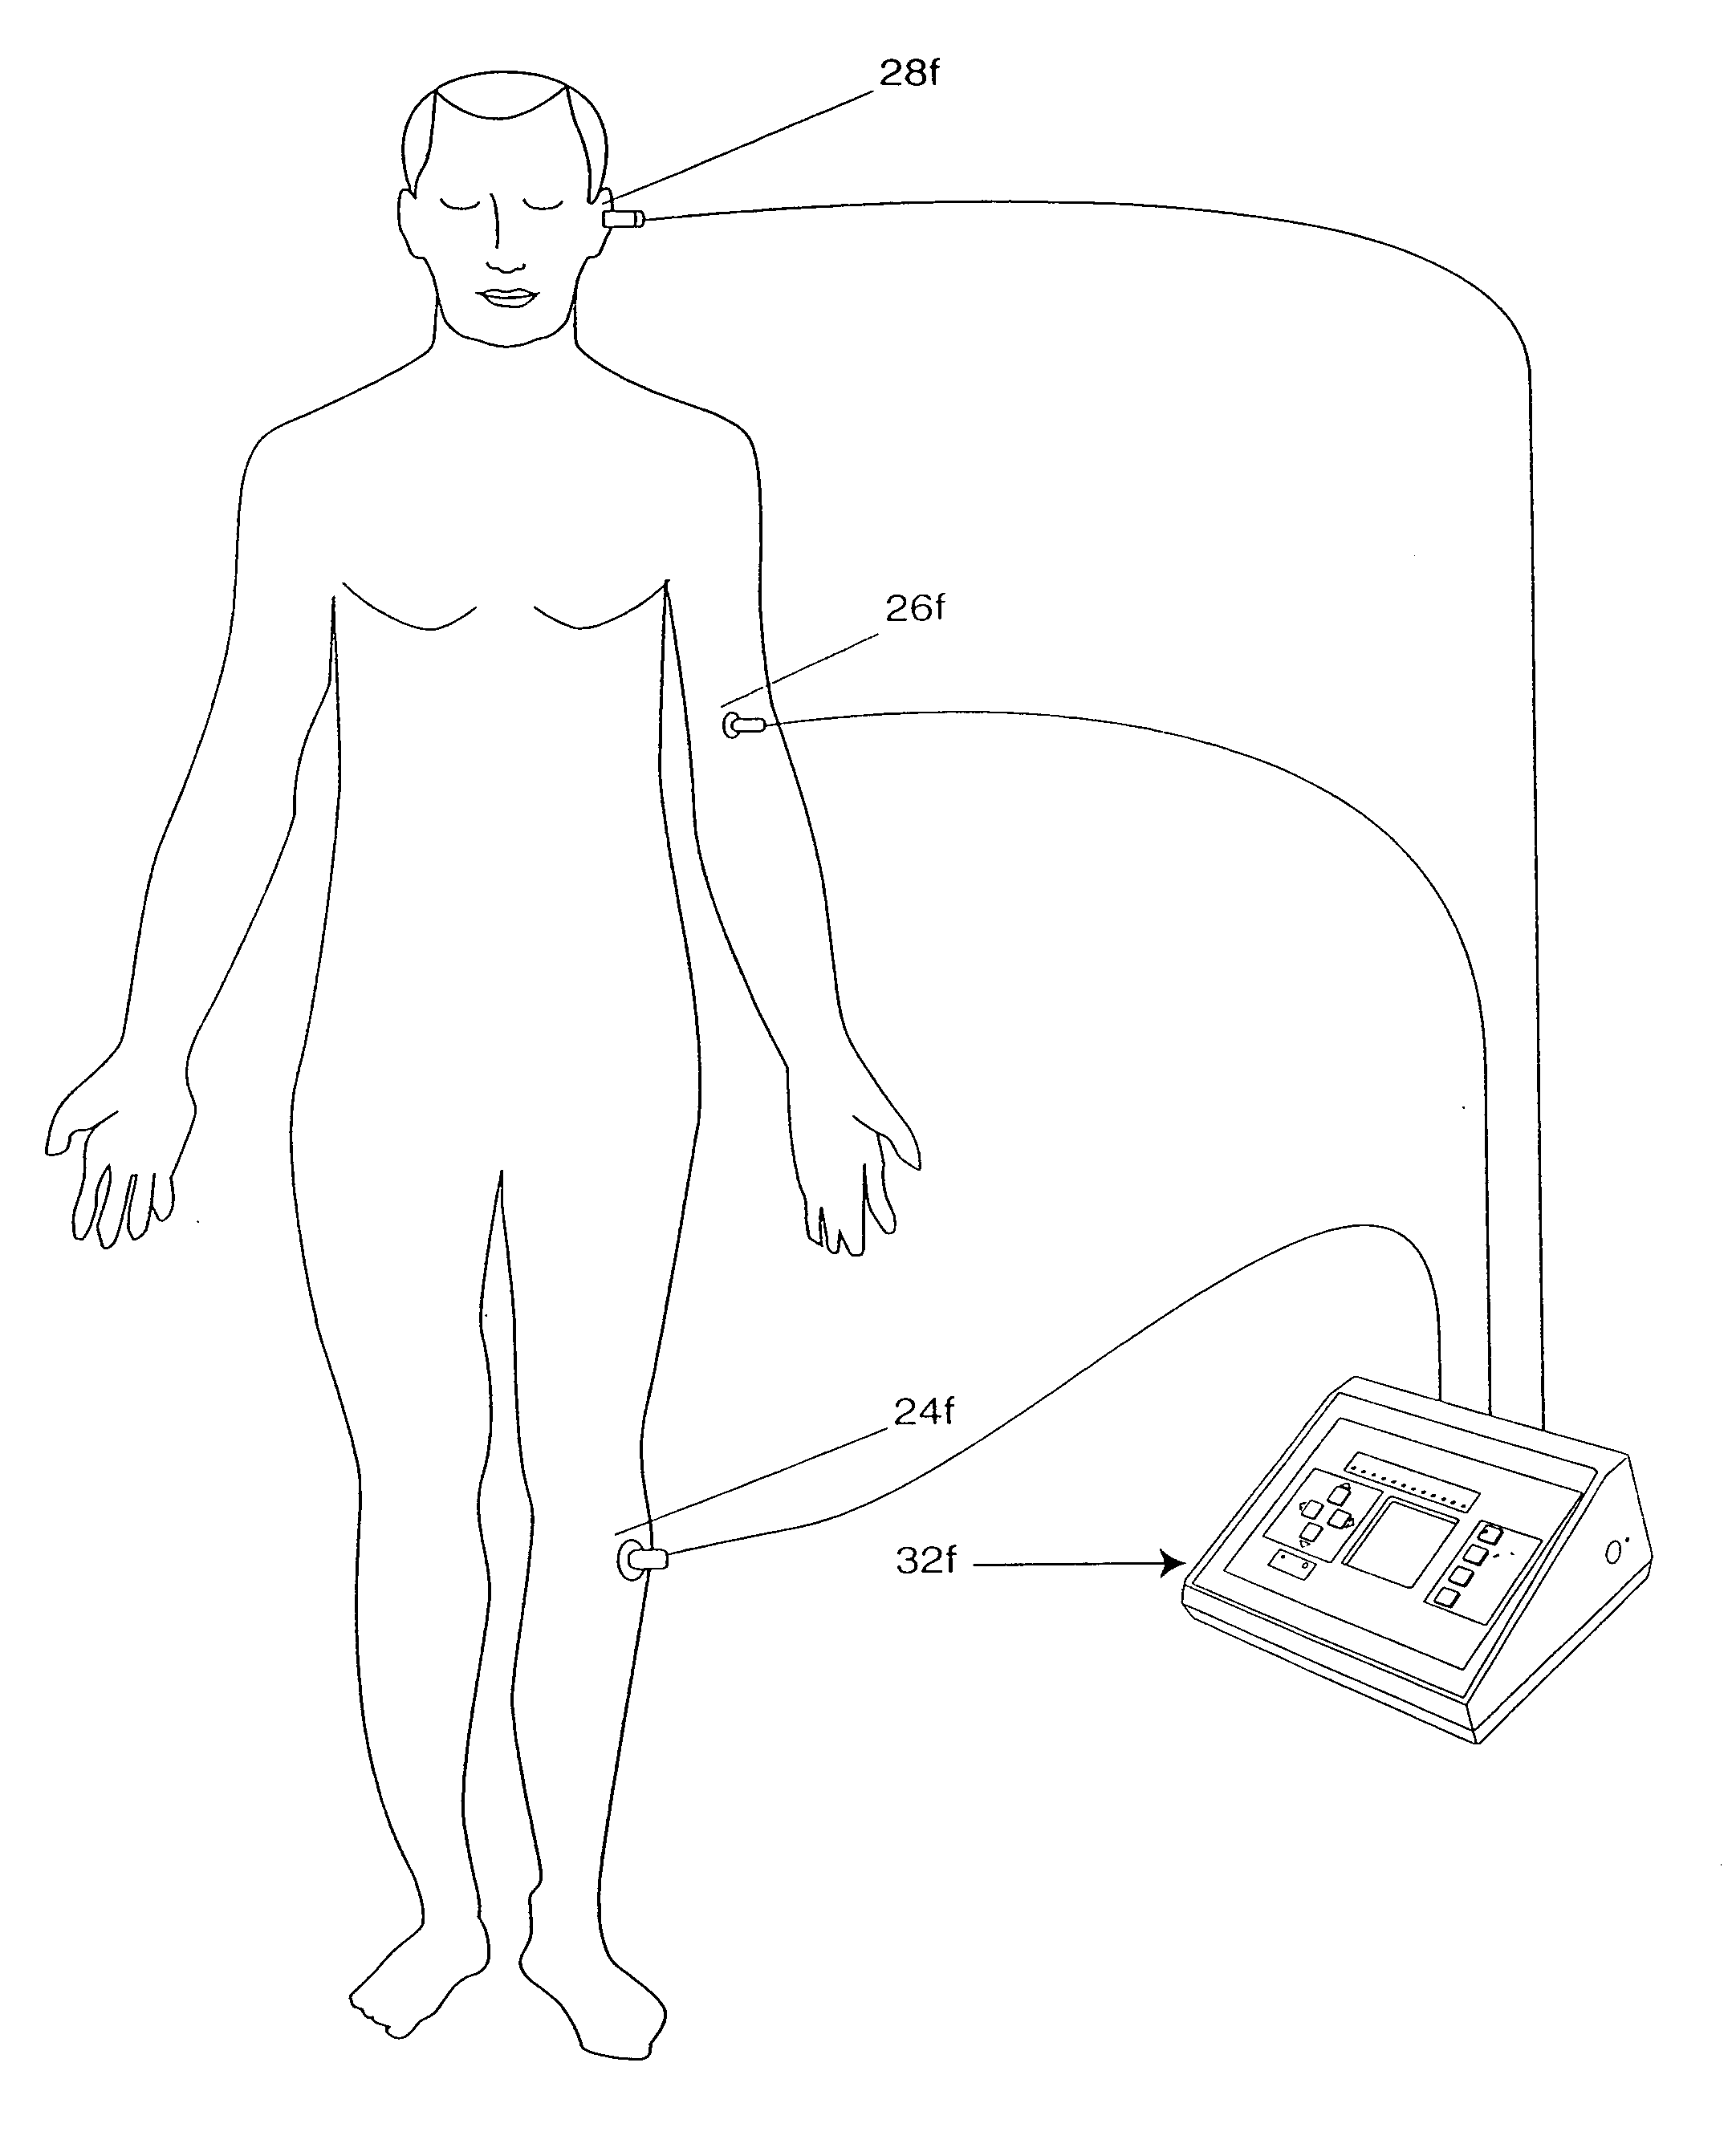 Method and apparatus for treating the body